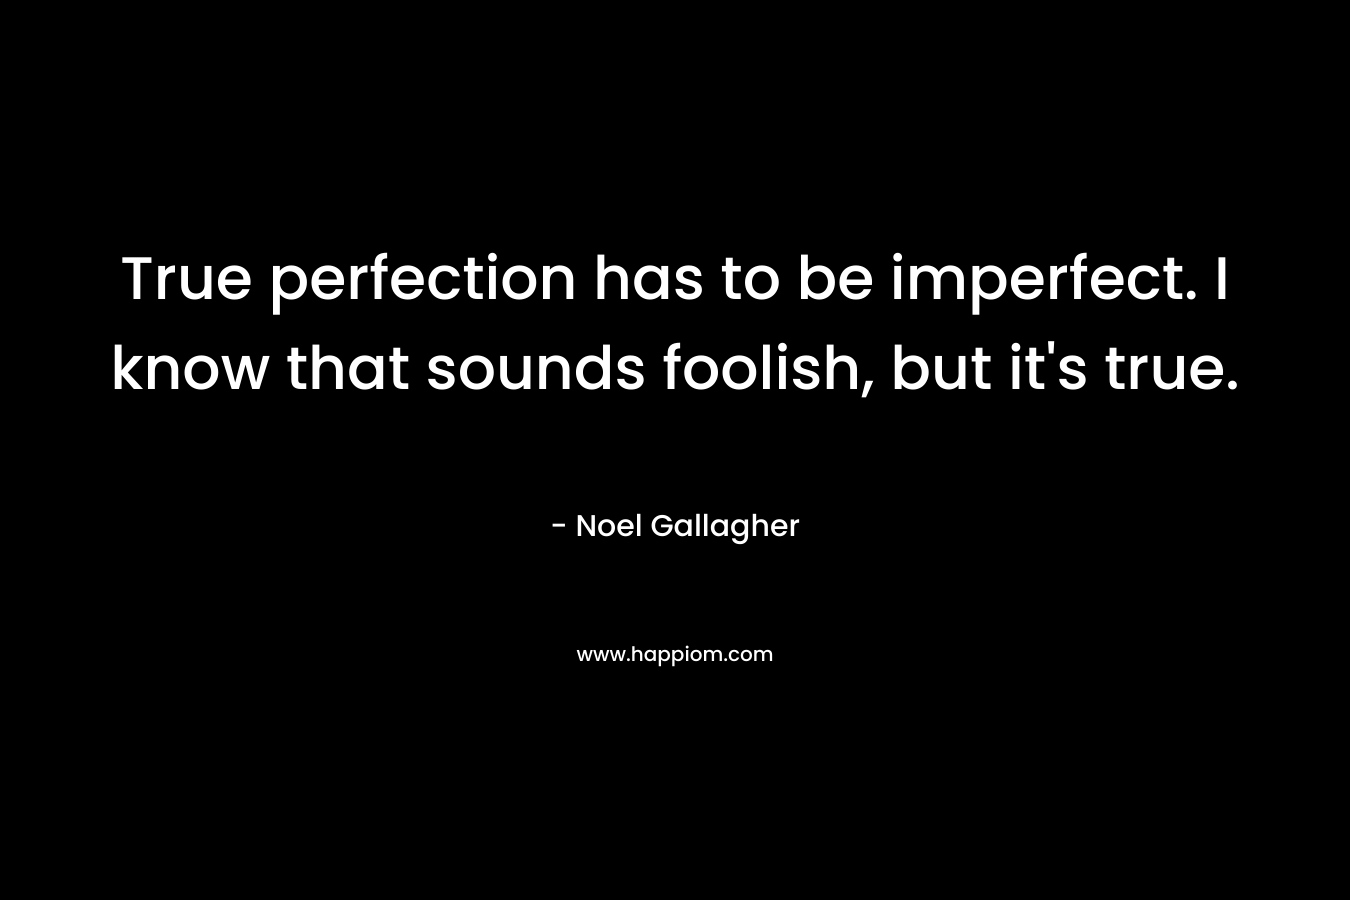 True perfection has to be imperfect. I know that sounds foolish, but it’s true. – Noel Gallagher